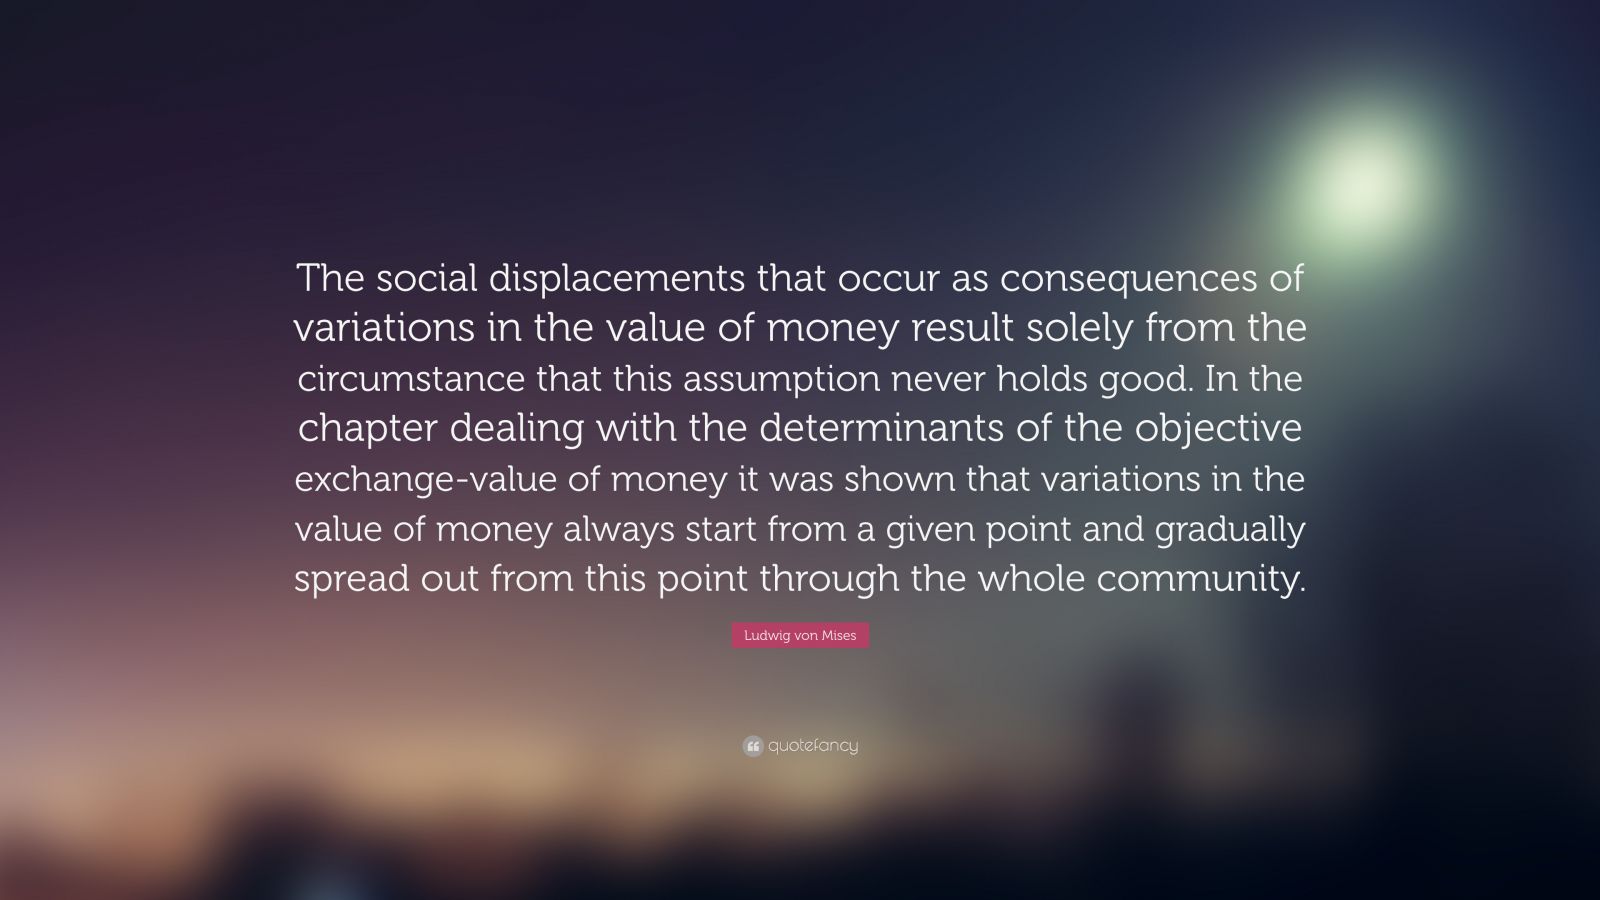 Ludwig von Mises Quote: “The social displacements that occur as ...